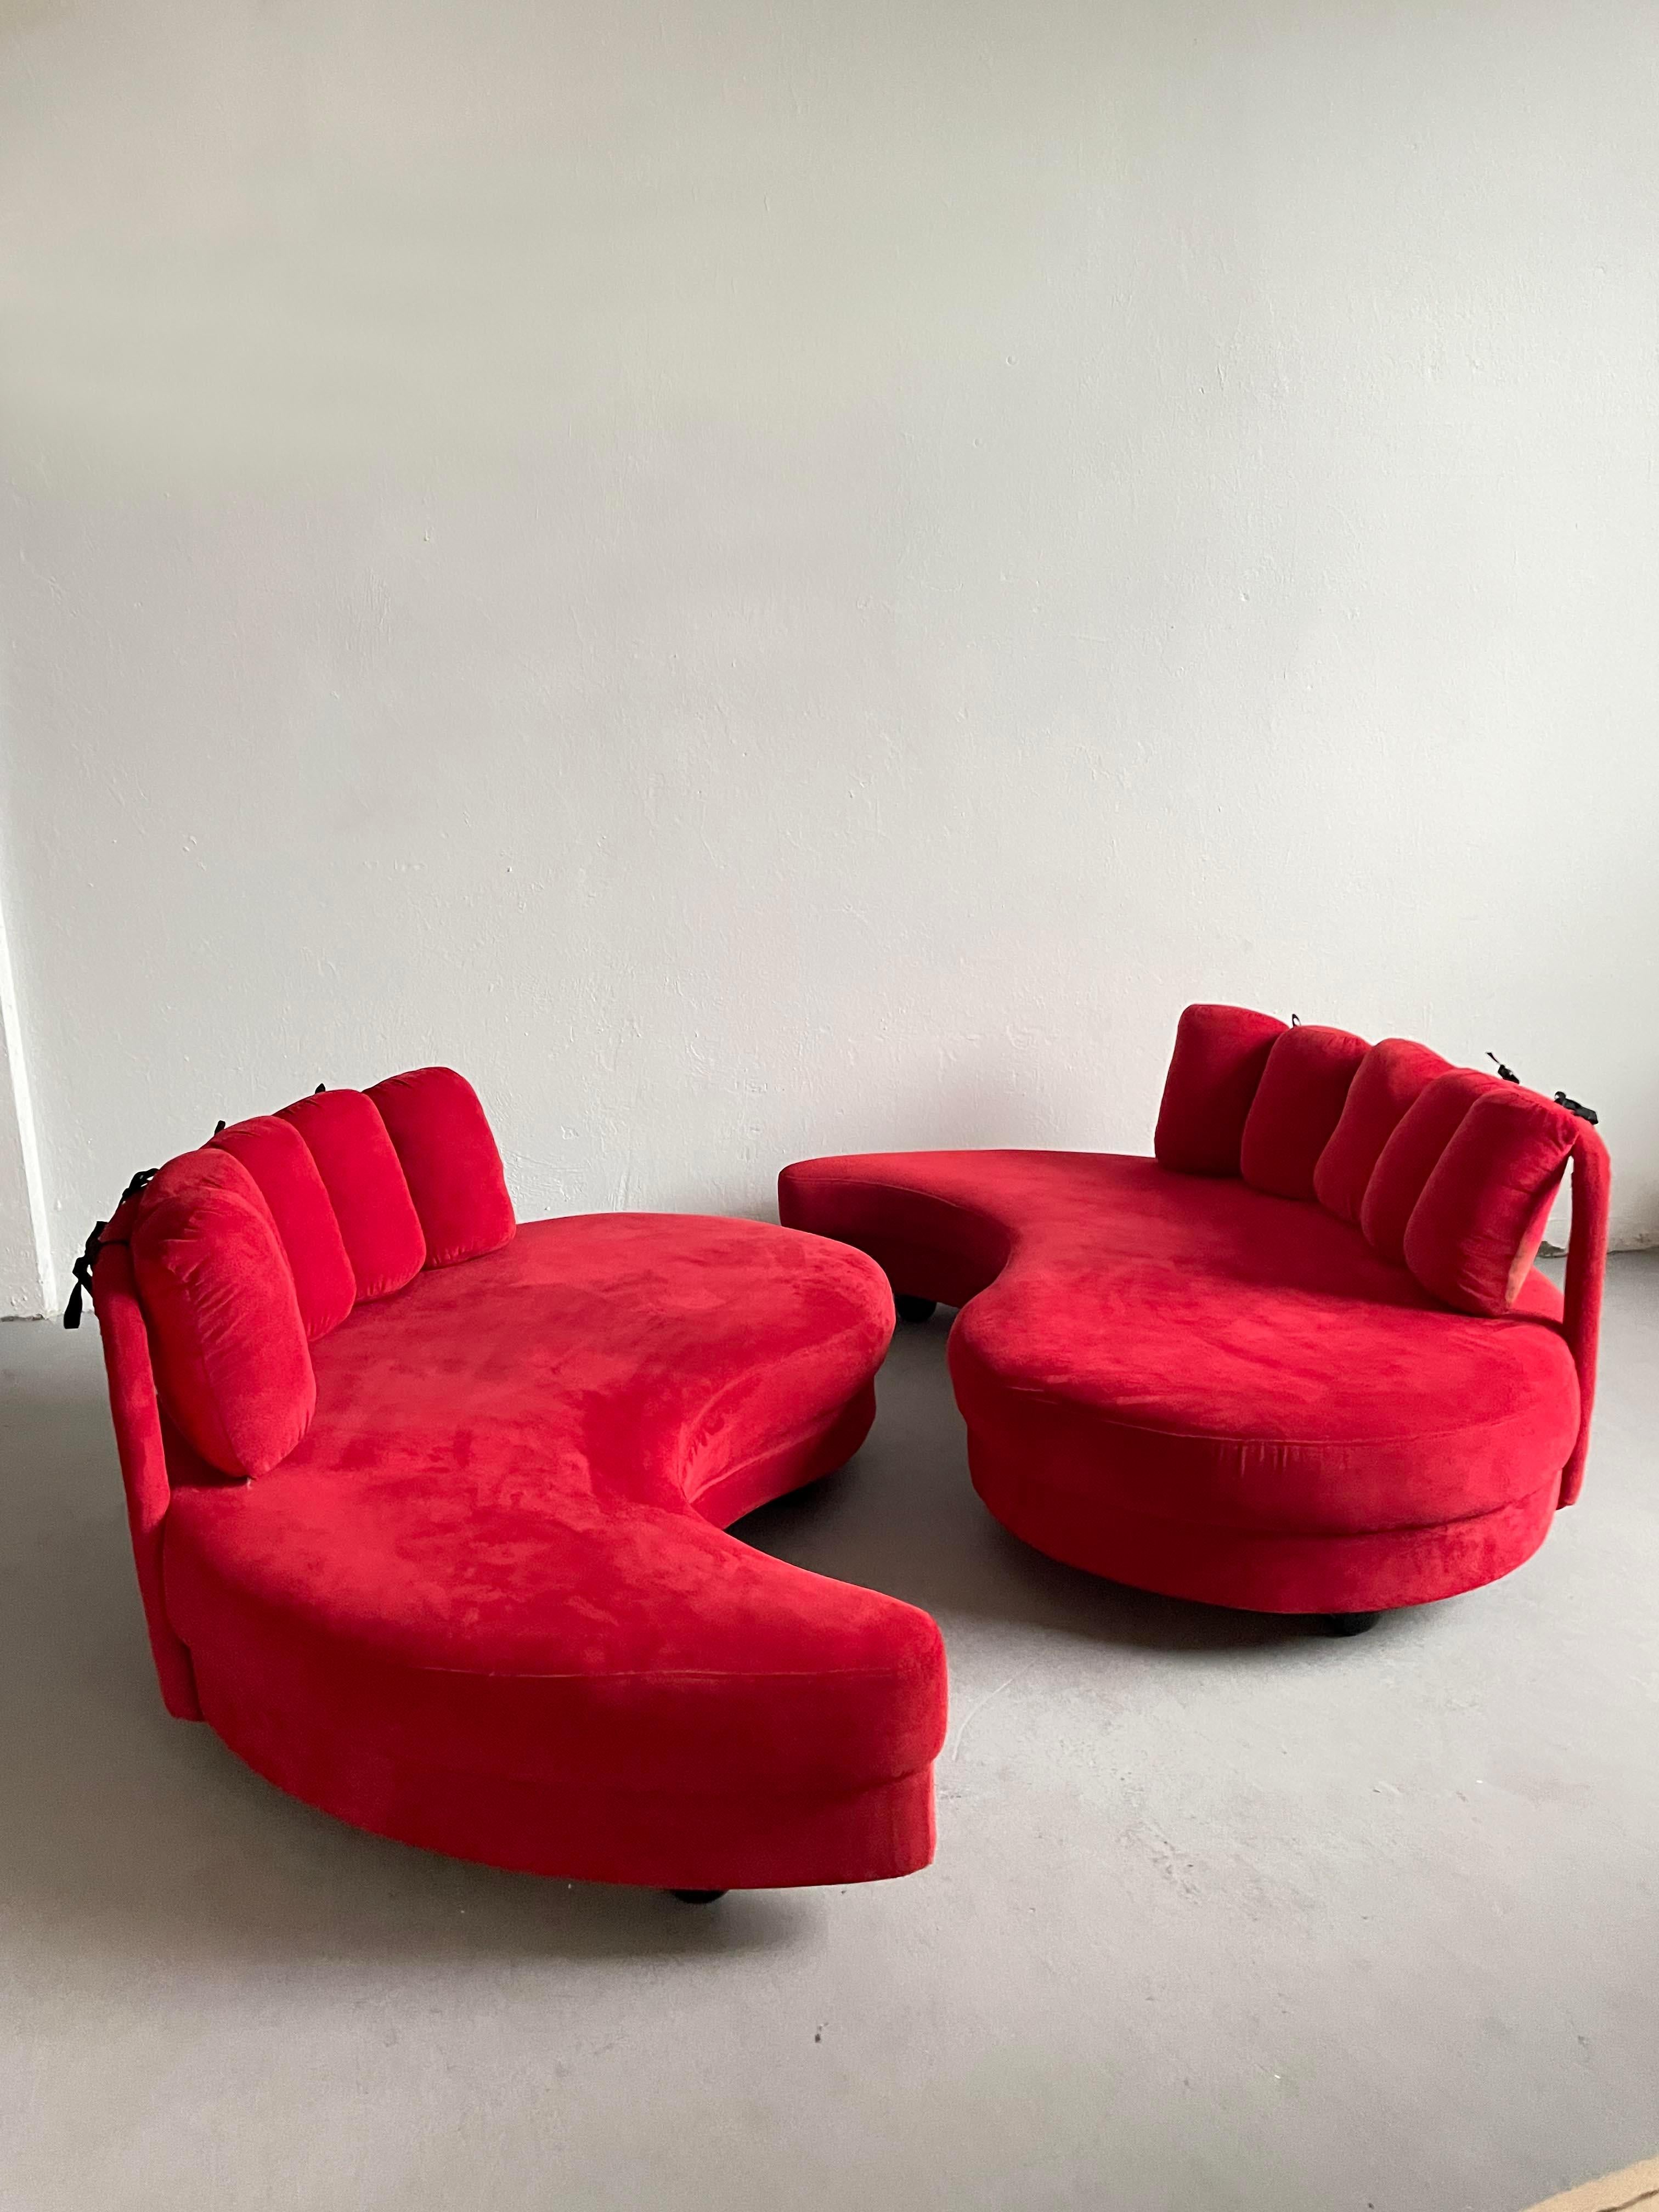 European Set of 2 Postmodern Curved Yin-Yang Shaped Sofa Daybeds in Red Fabric, c 1980s For Sale